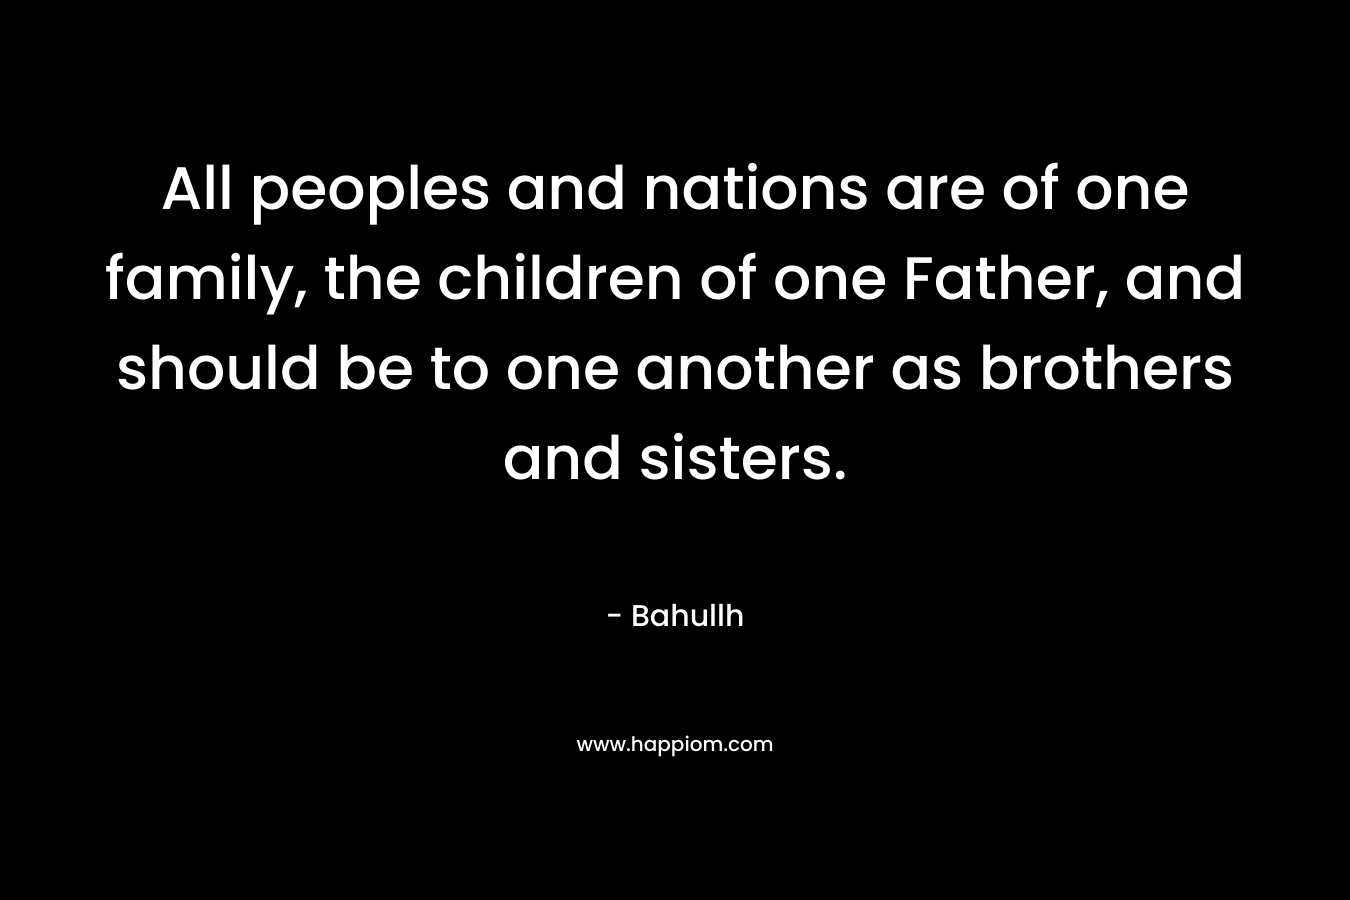 All peoples and nations are of one family, the children of one Father, and should be to one another as brothers and sisters.